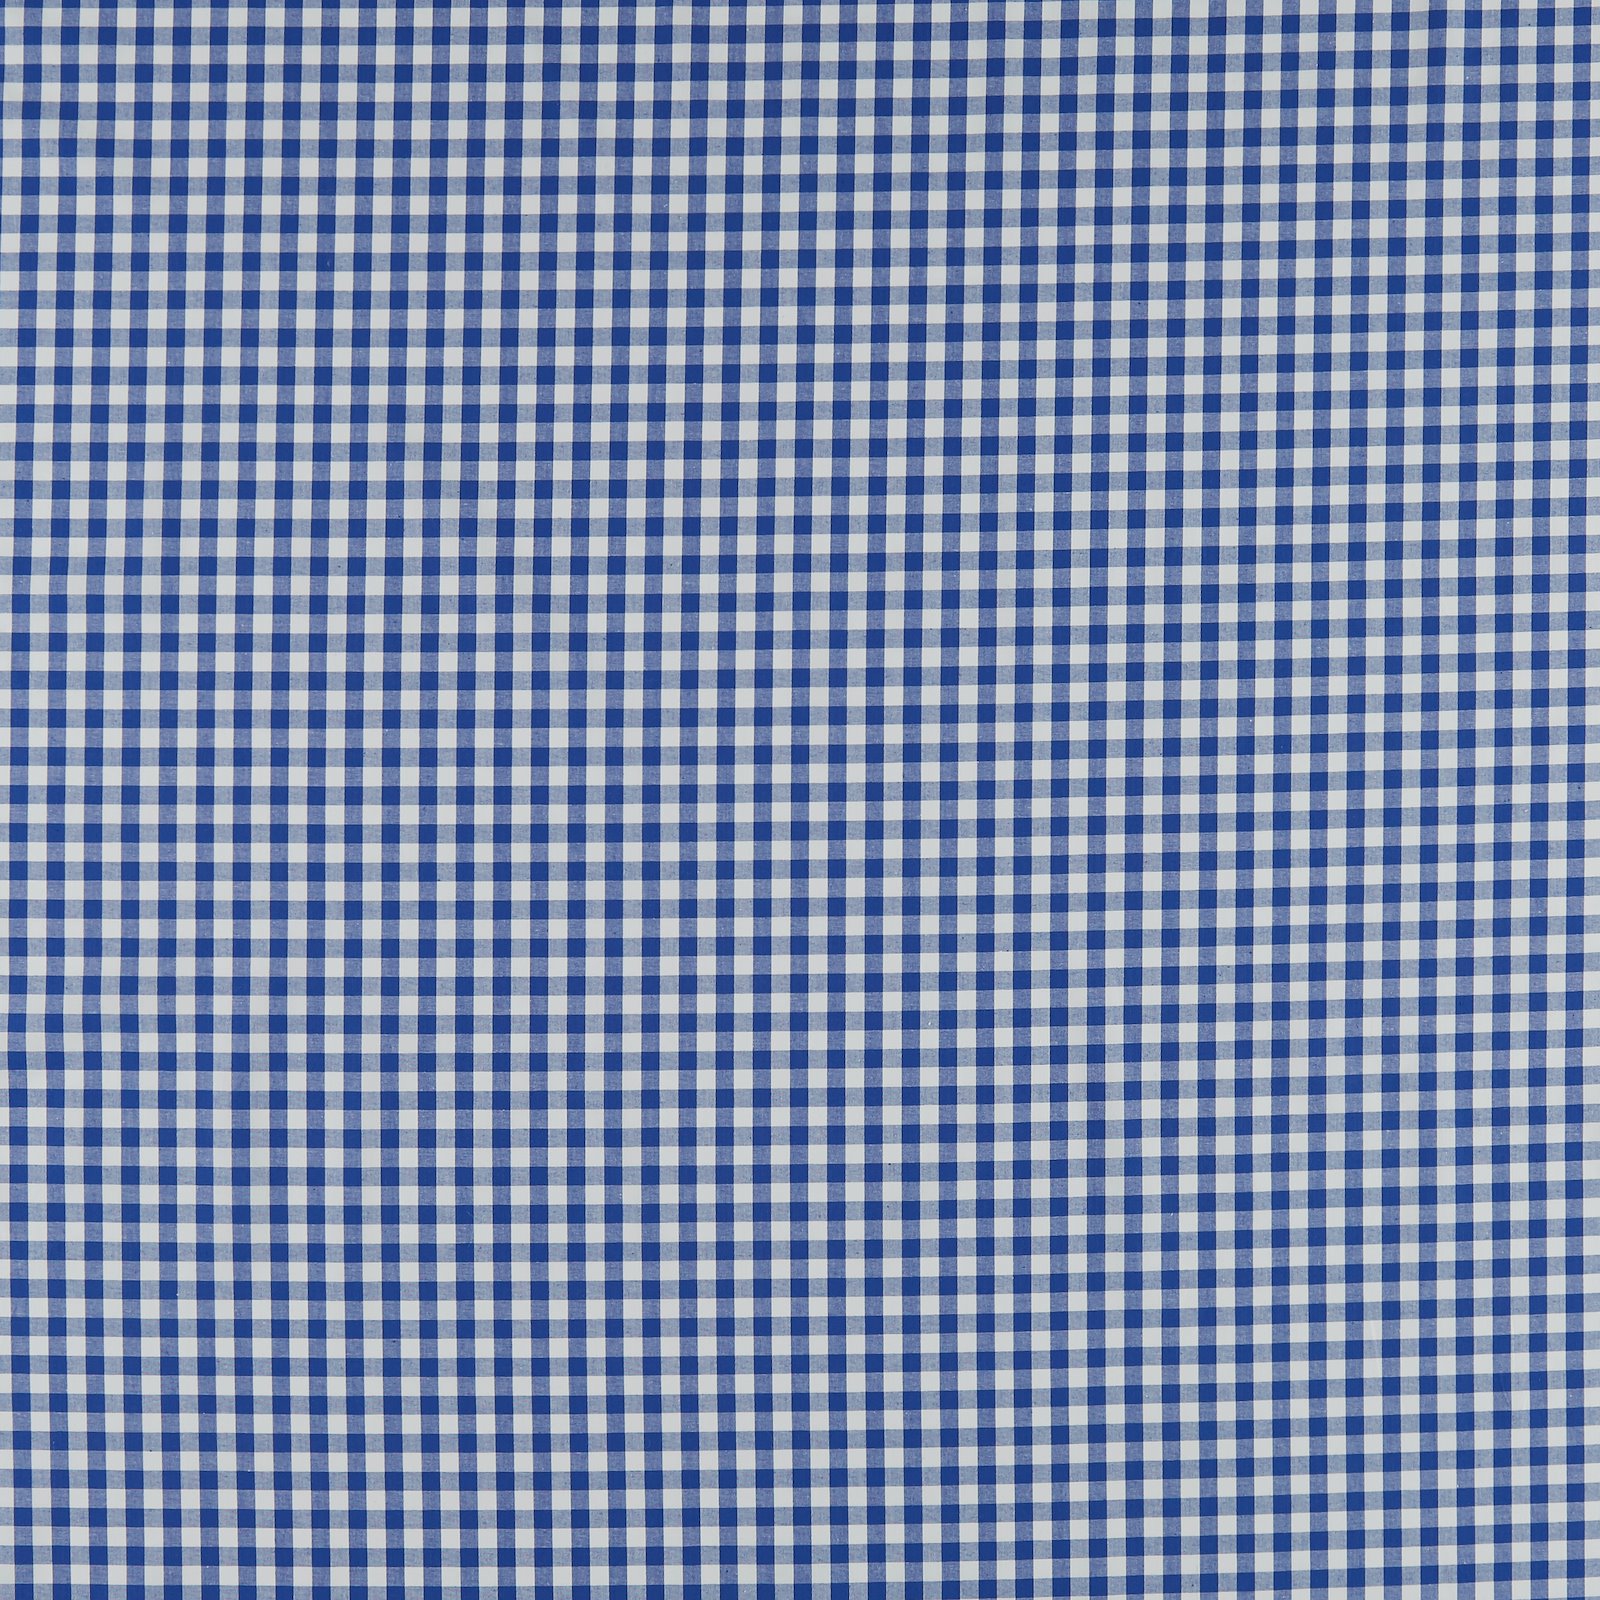 Cotton yarn dyed cobalt/white check 780892_pack_sp